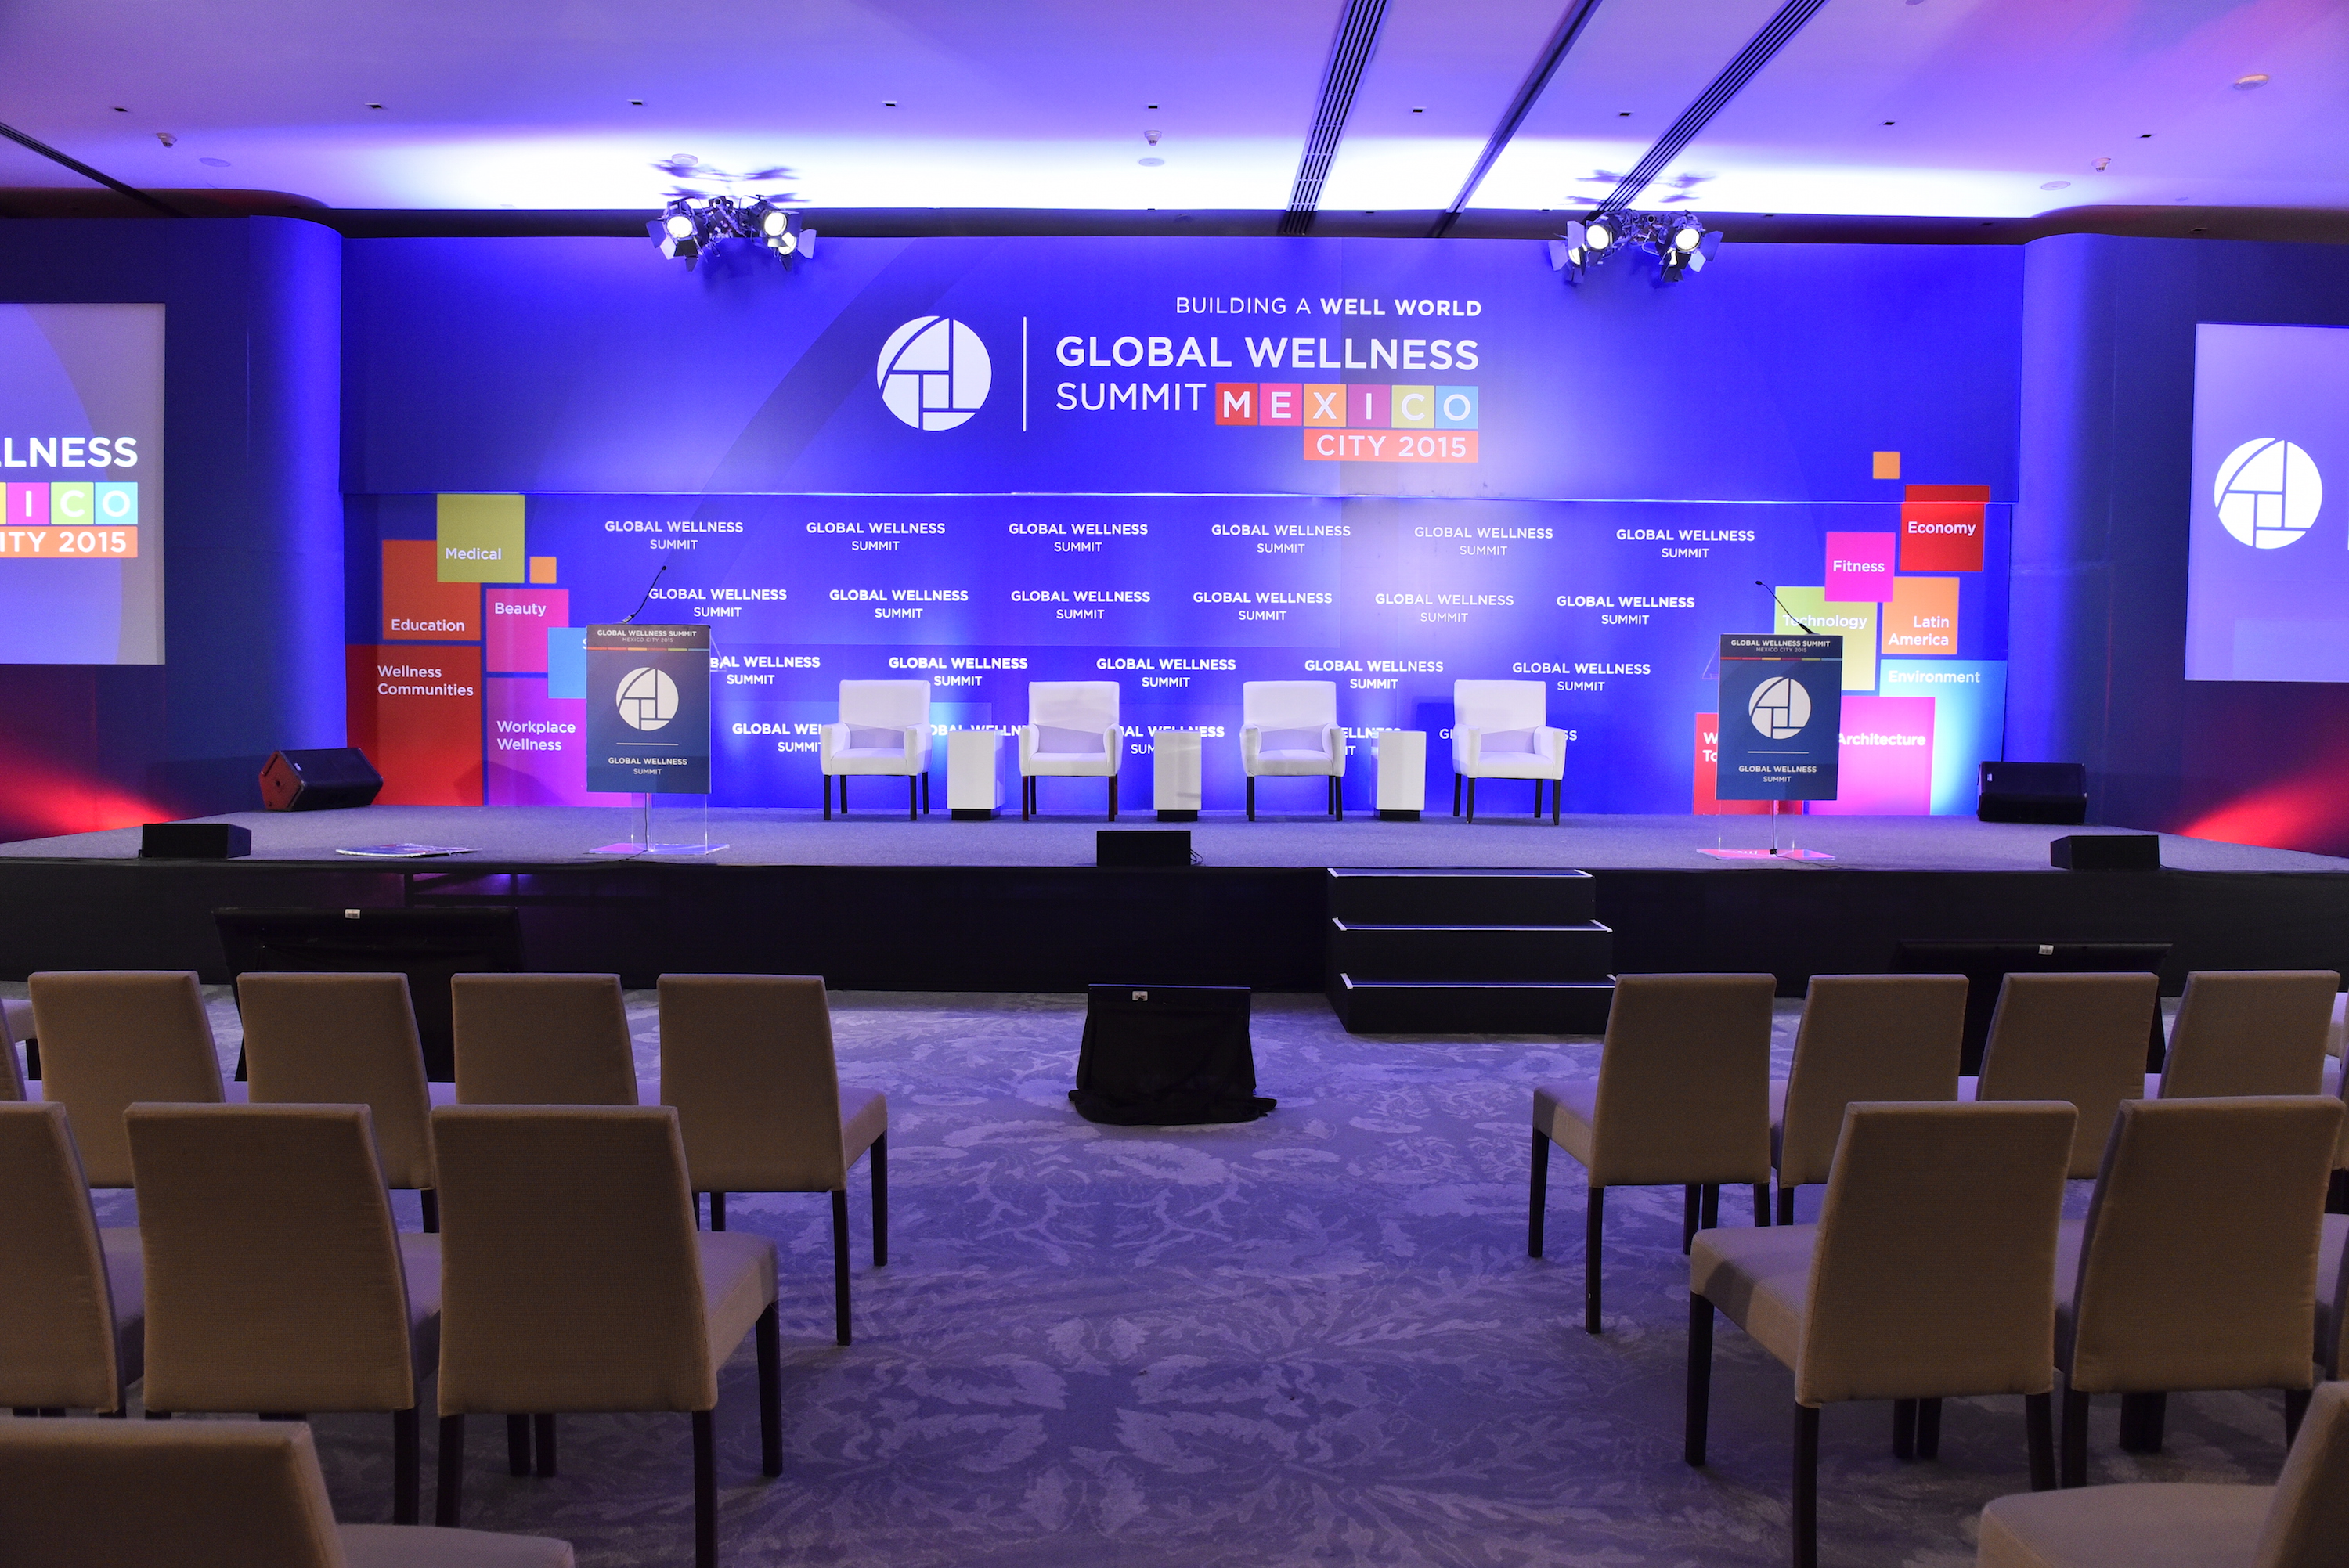 The Stage is Set for The Ninth Annual Global Wellness Summit